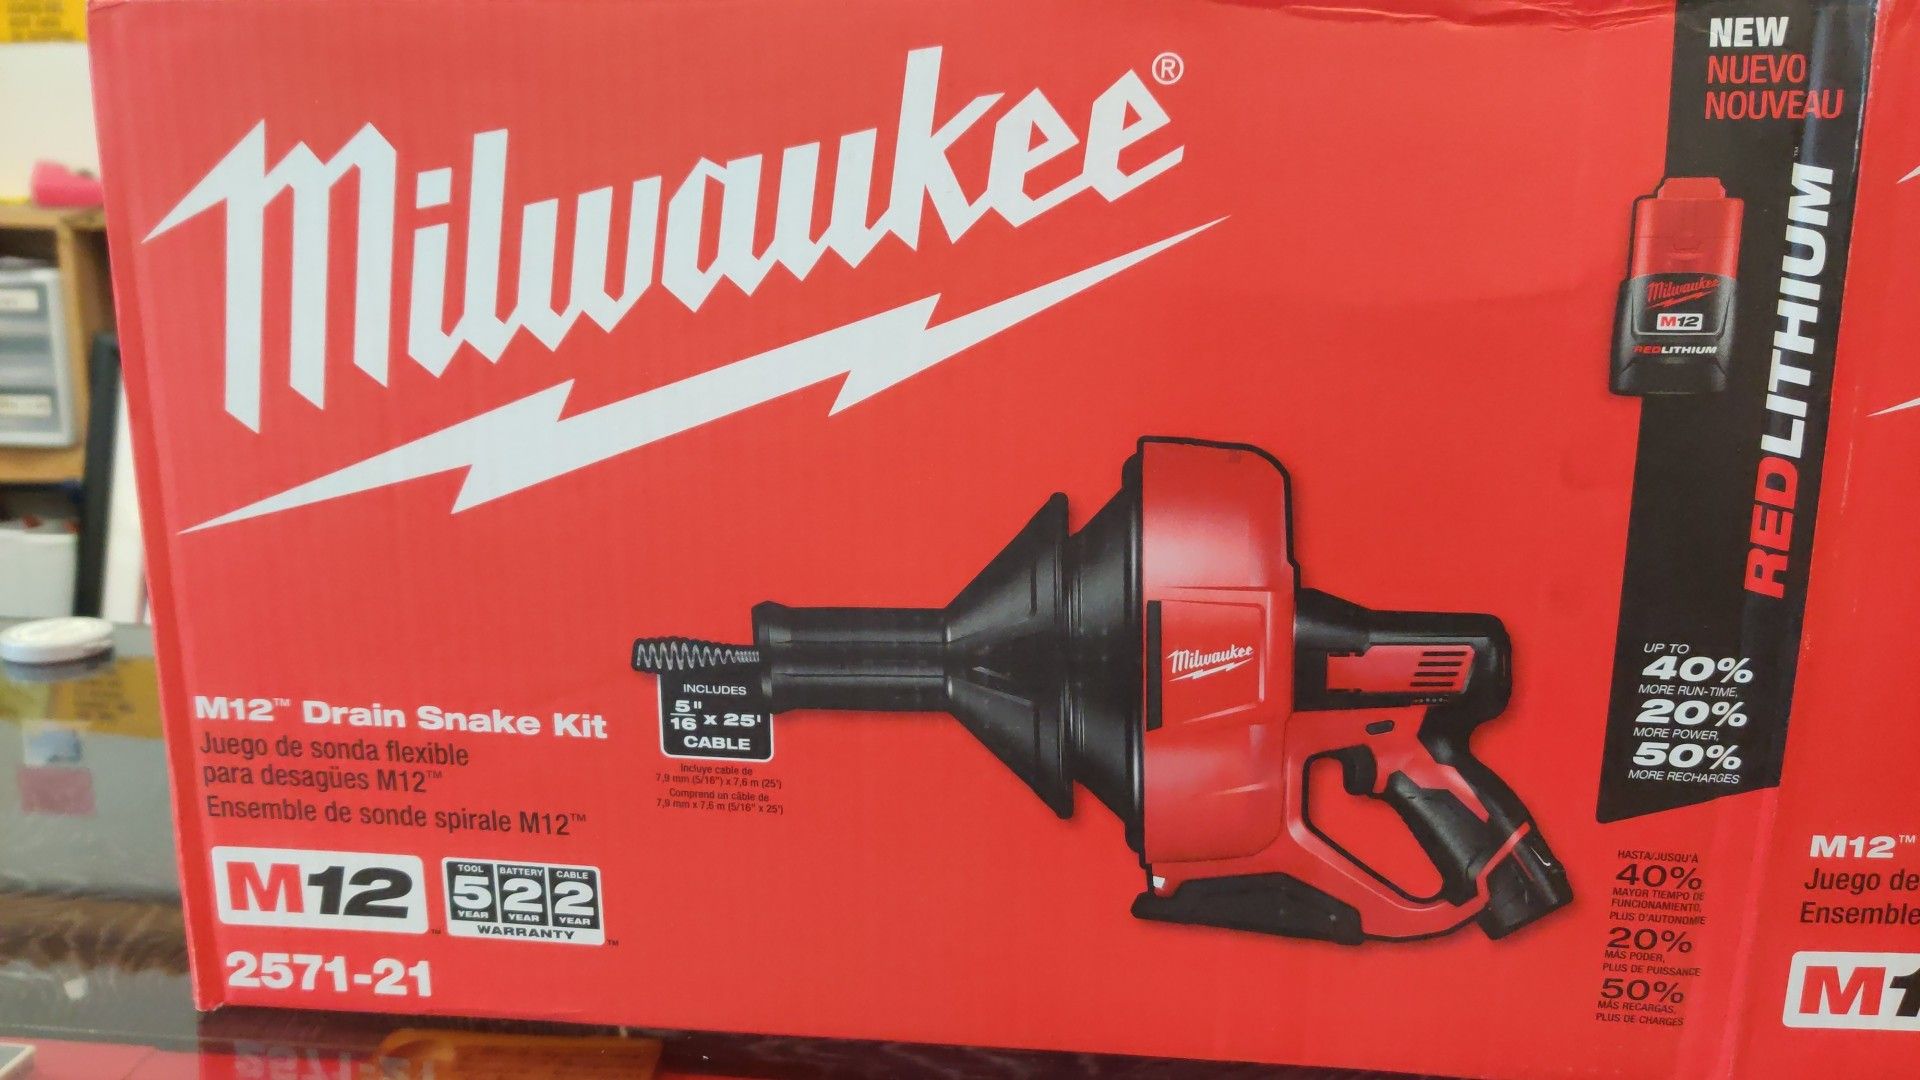 Milwaukee M12 Drain Snake Kit (New in Box, Box top was opened but tool was never removed)